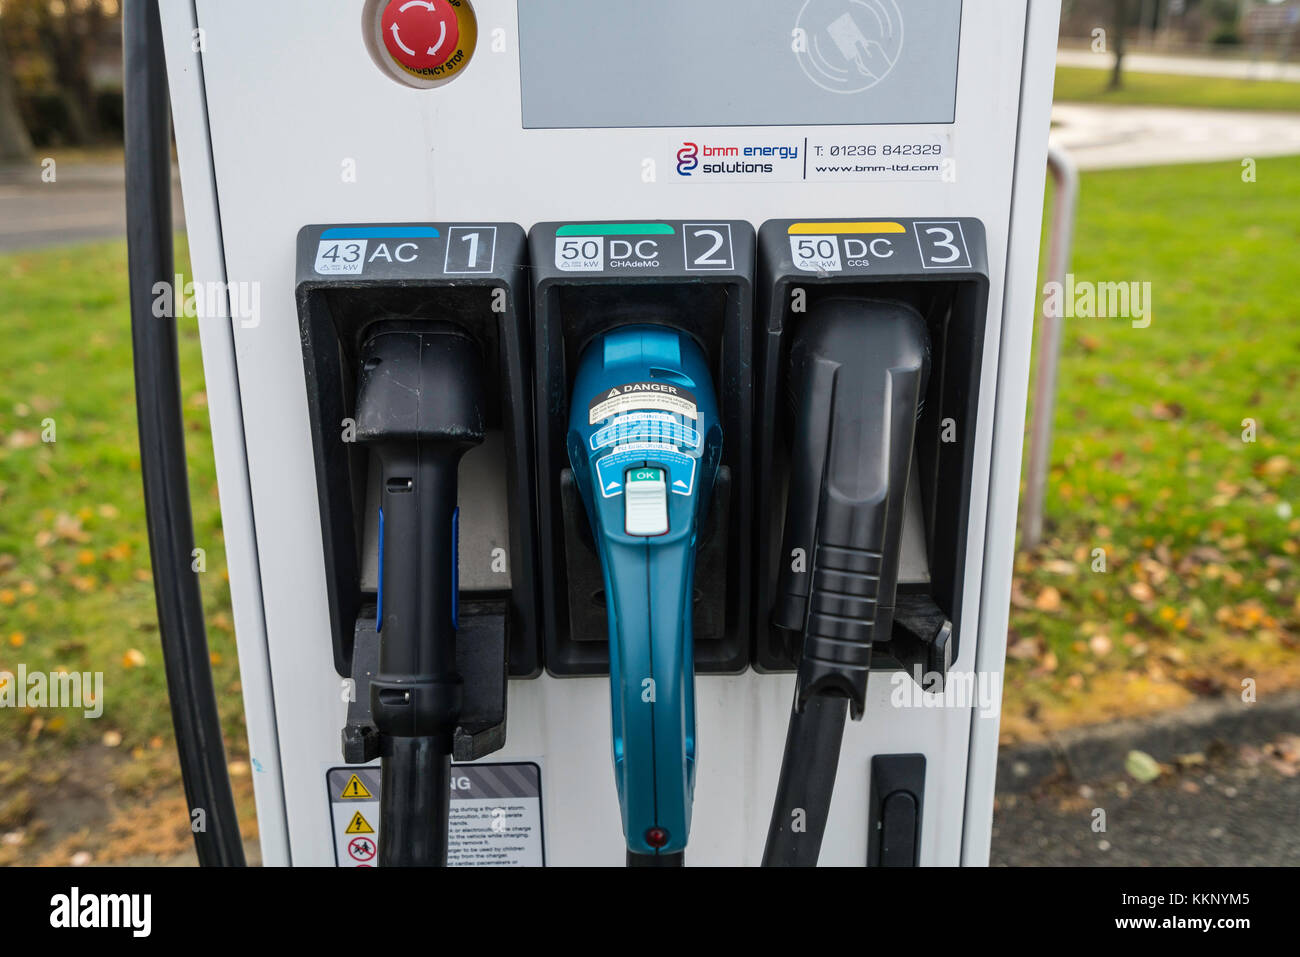 Public plug-in charging station for electric cars Stock Photo